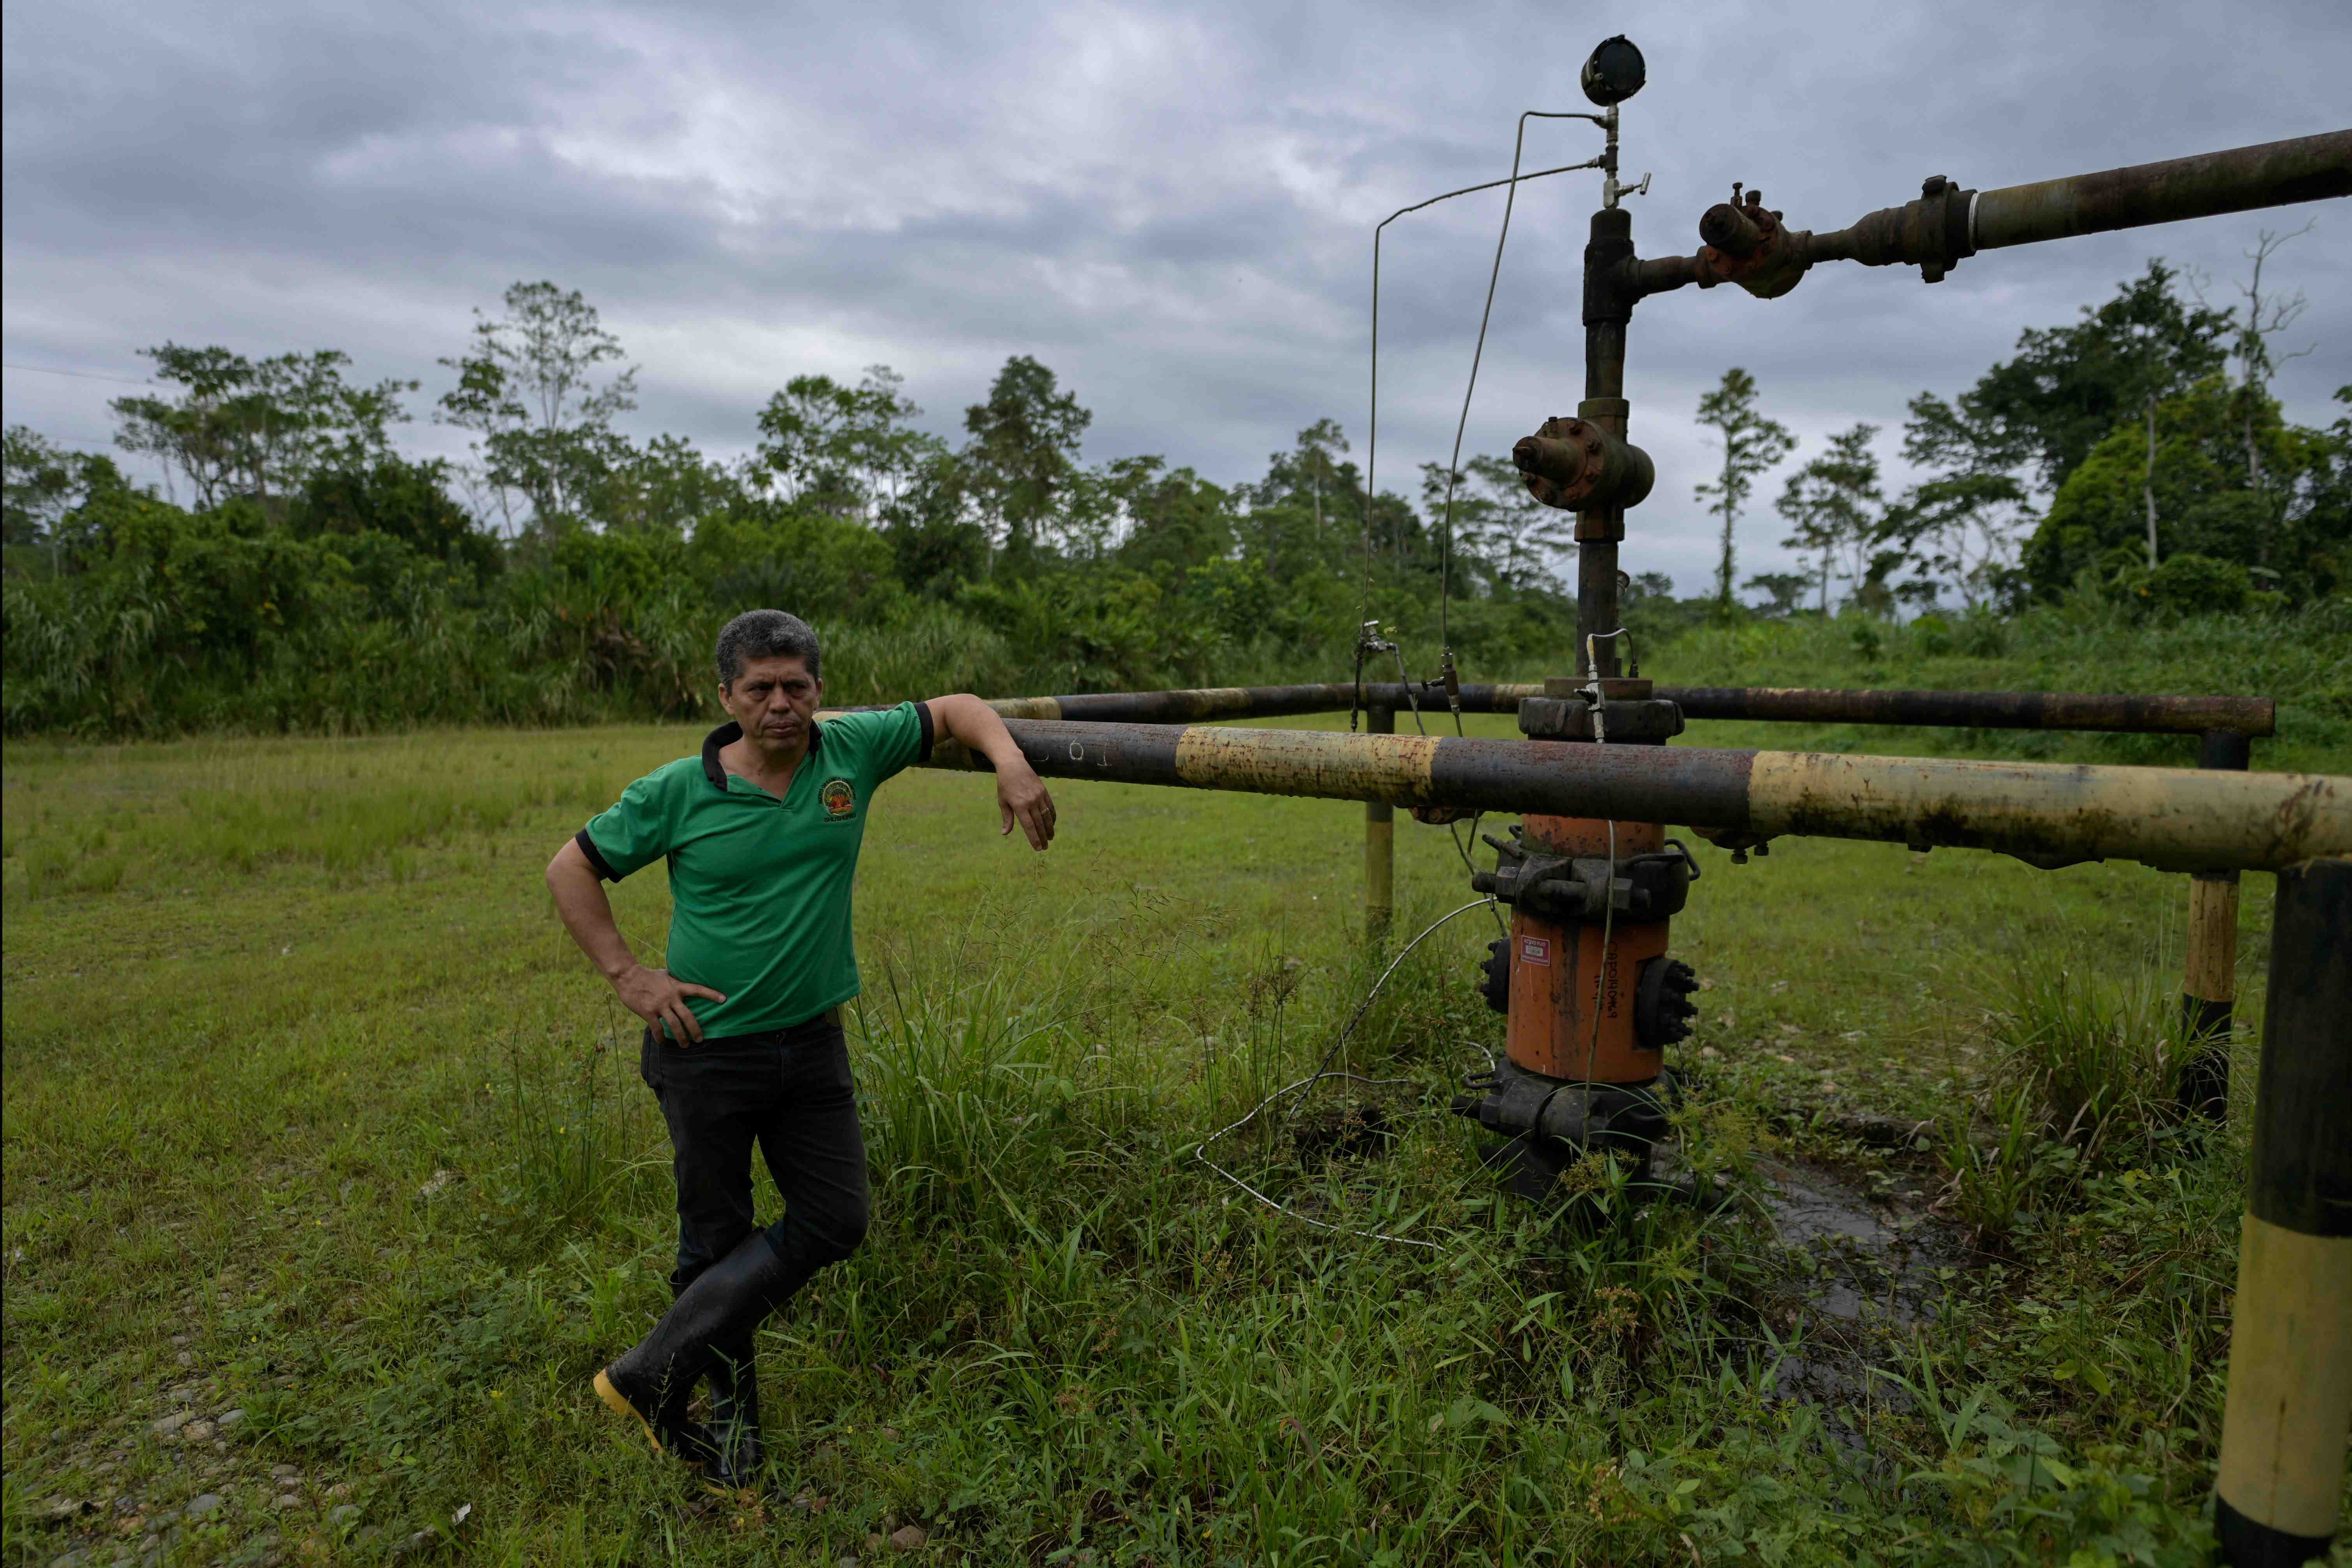 Ecuadorian lawyer and activist Pablo Fajardo Mendoza, member of the Union of People Affected by Texaco (UDAPT), stands next to an oil well, during a tour to the areas affected by the Chevron/Texaco oil company, in Shushufindi, in the Sucumbíos Province, Ecuador, on January 7, 2023.